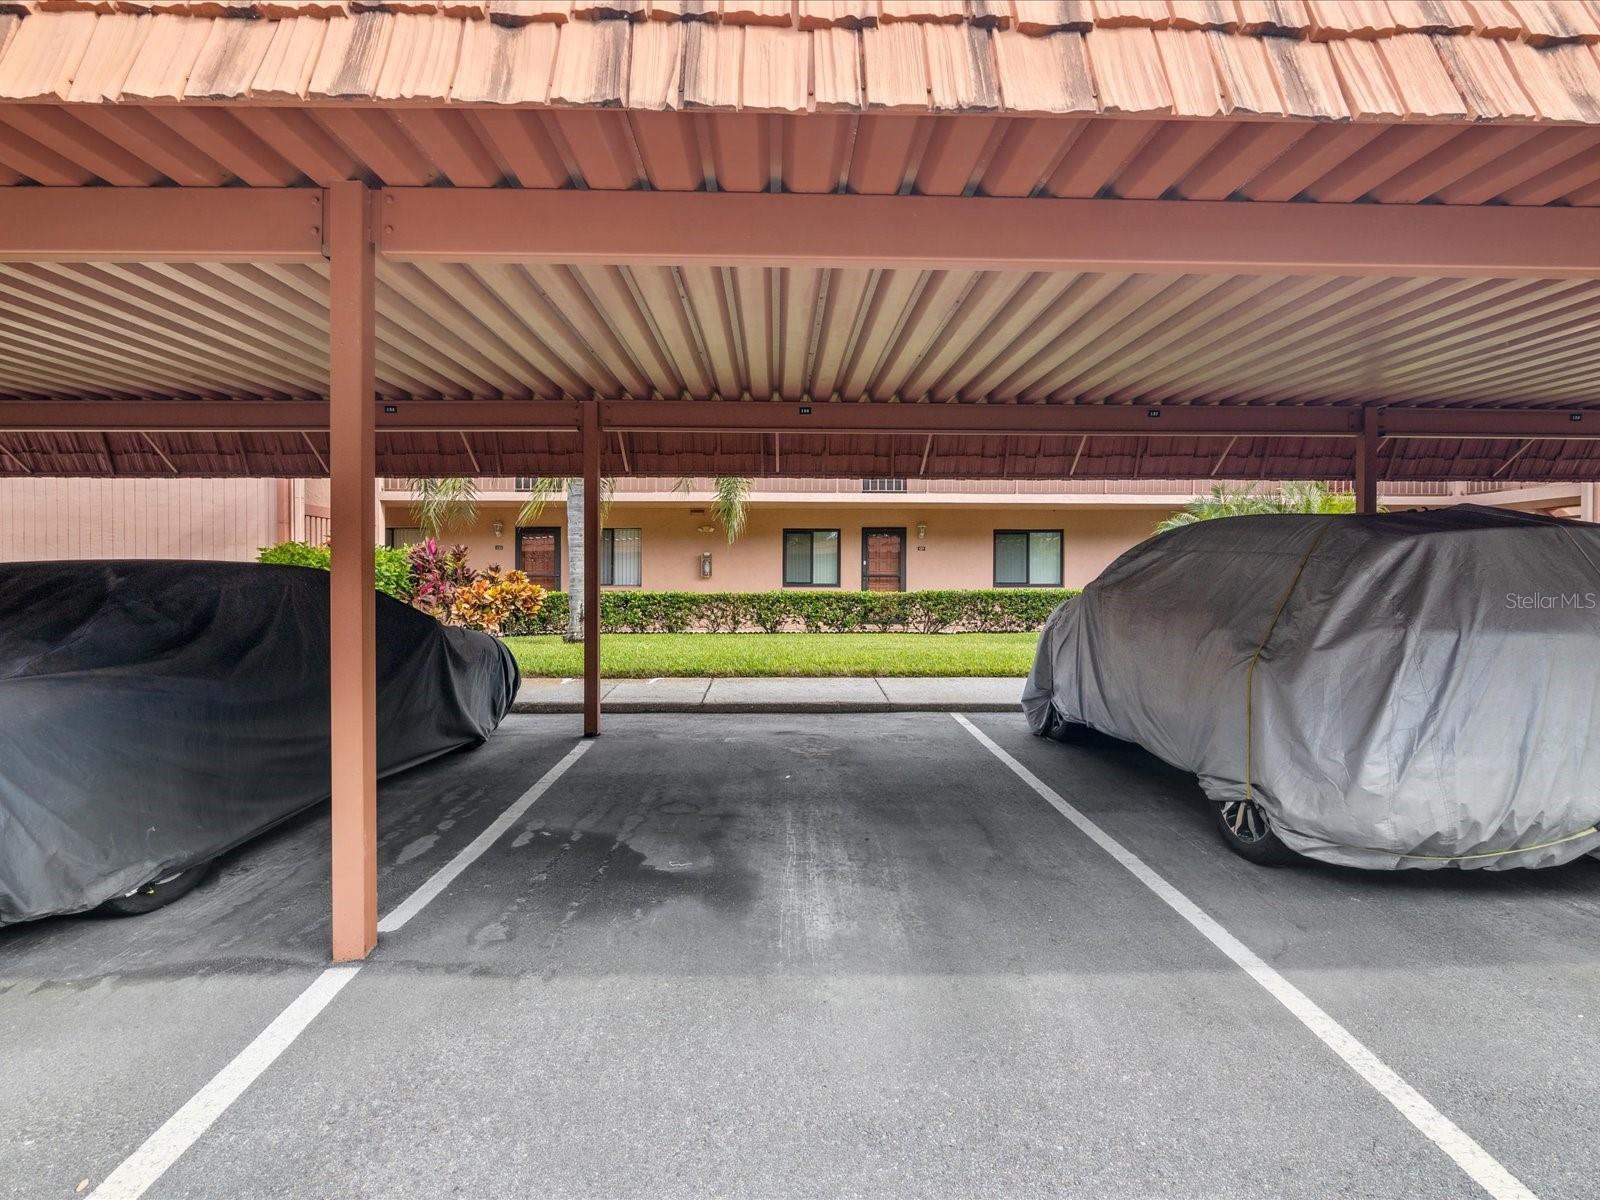 COVERED PARKING